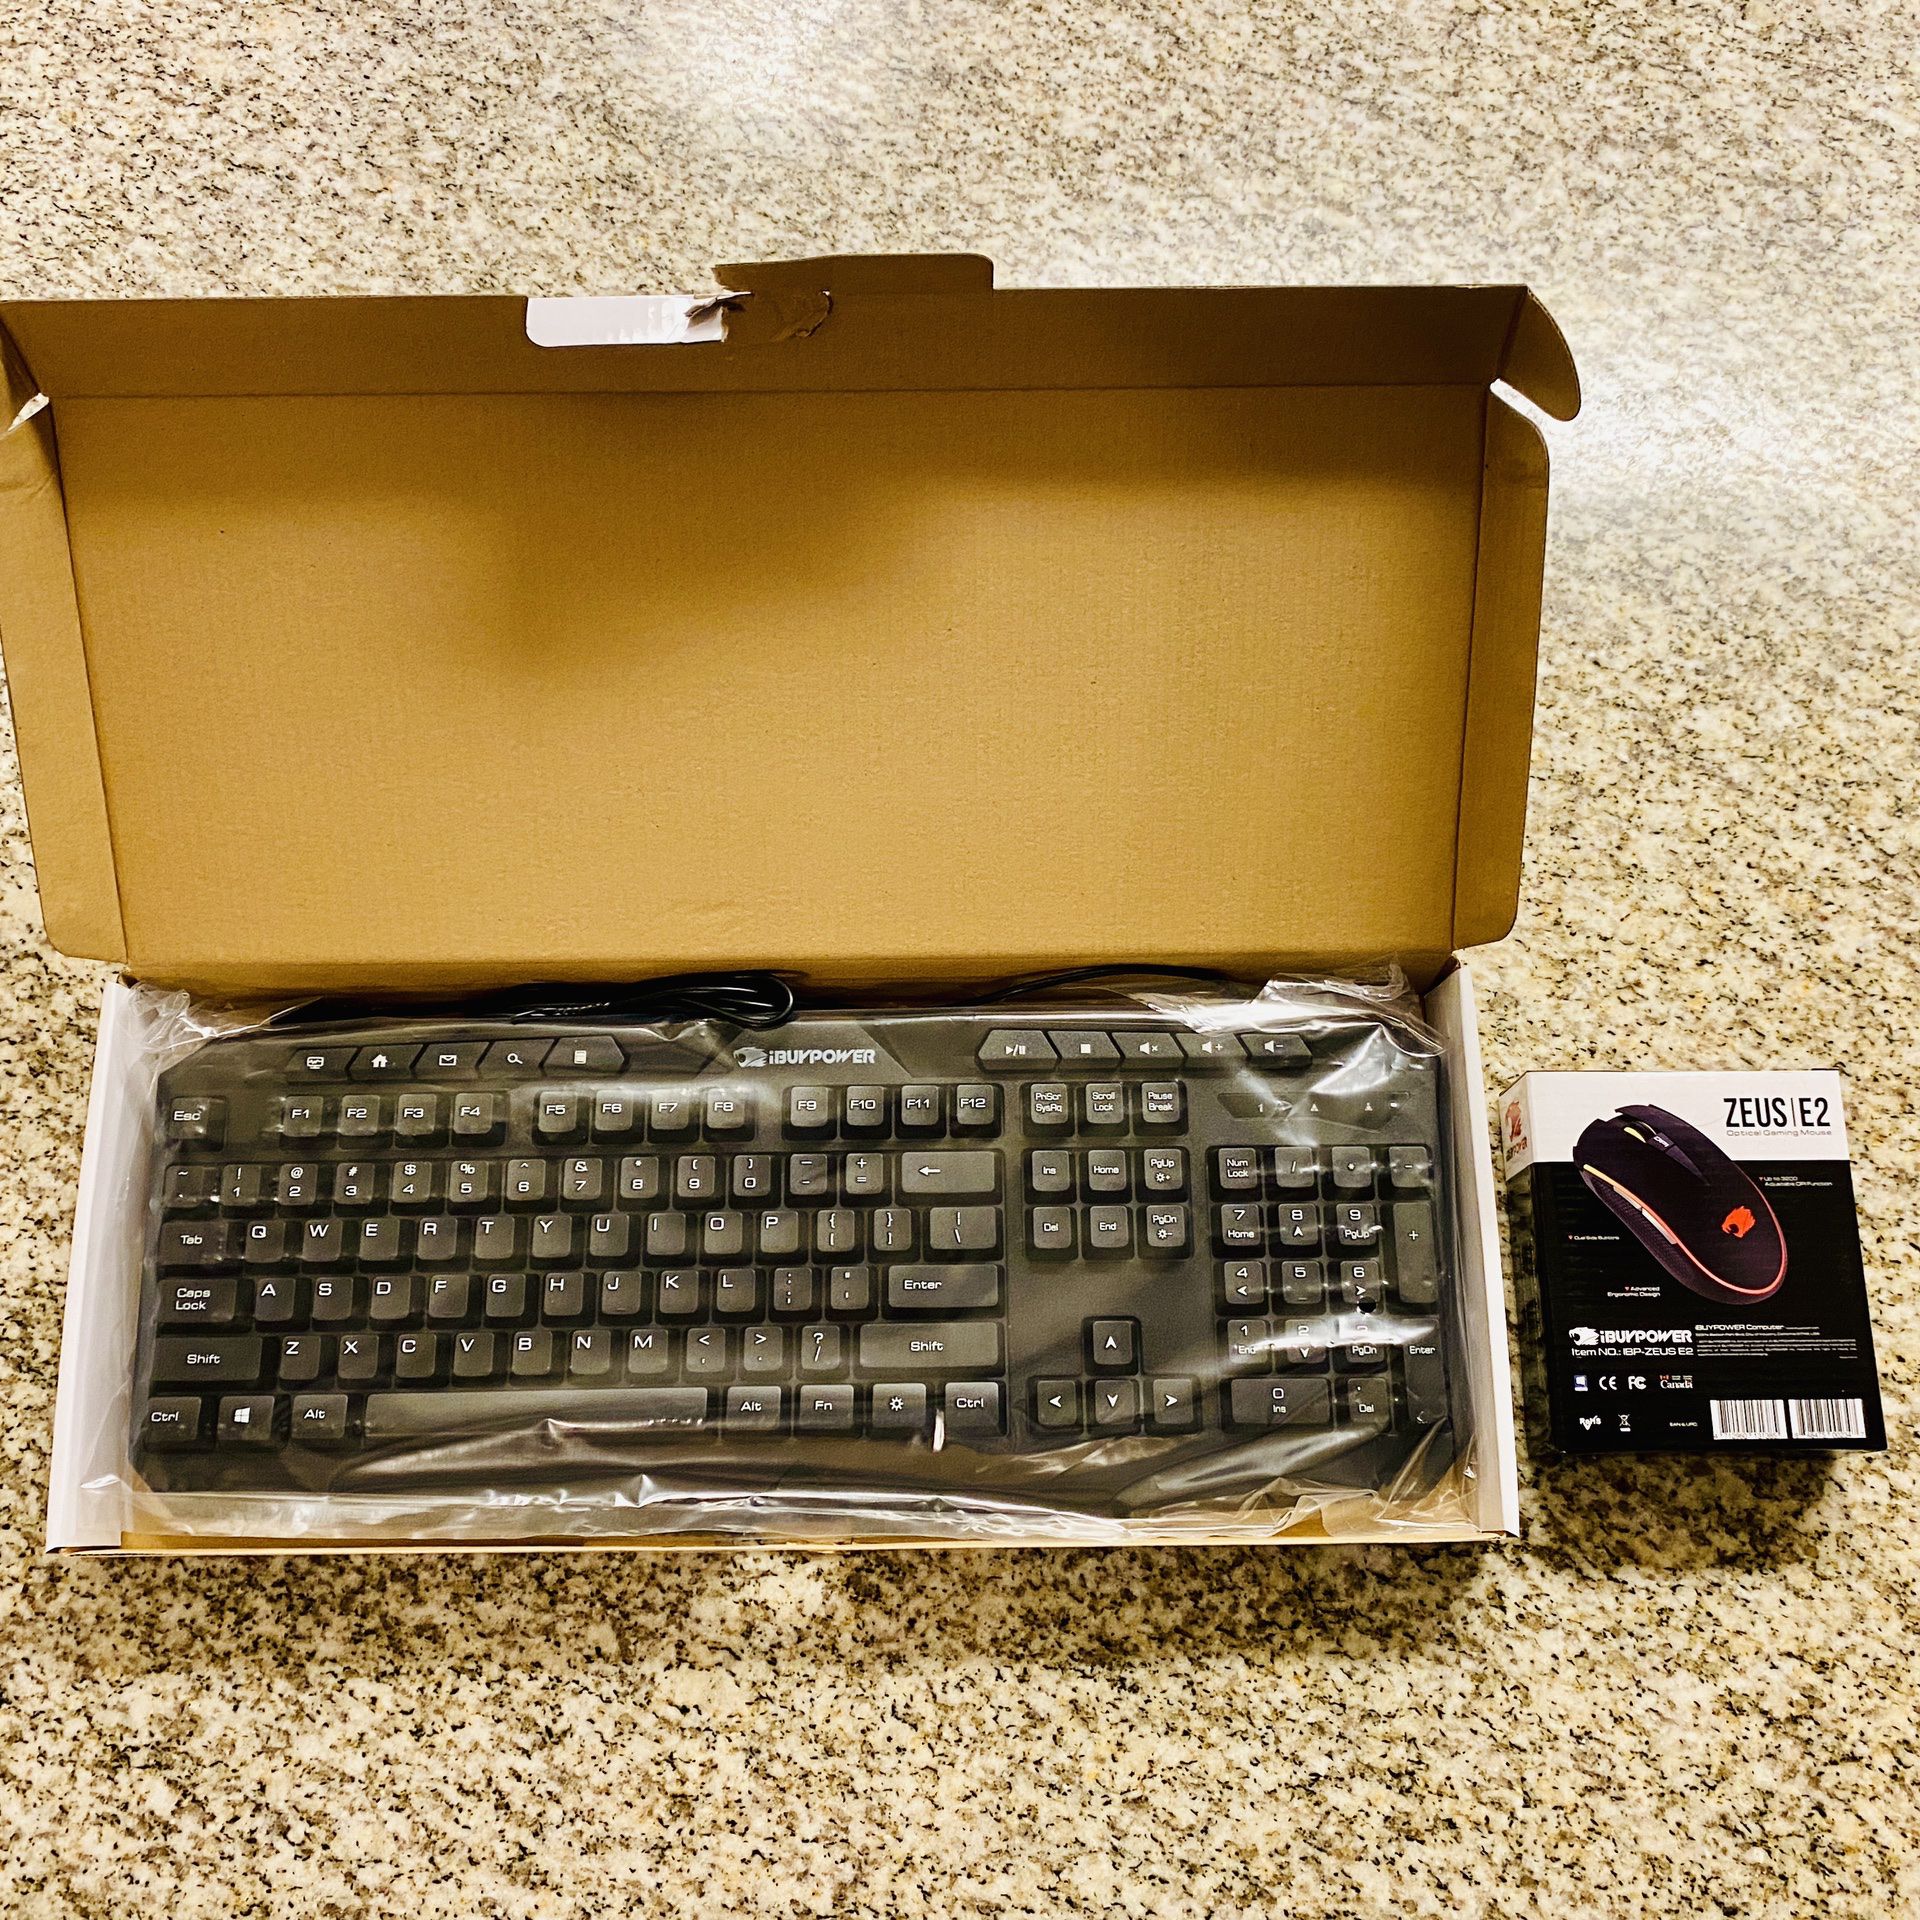 GAMING MOUSE AND KEYBOARD